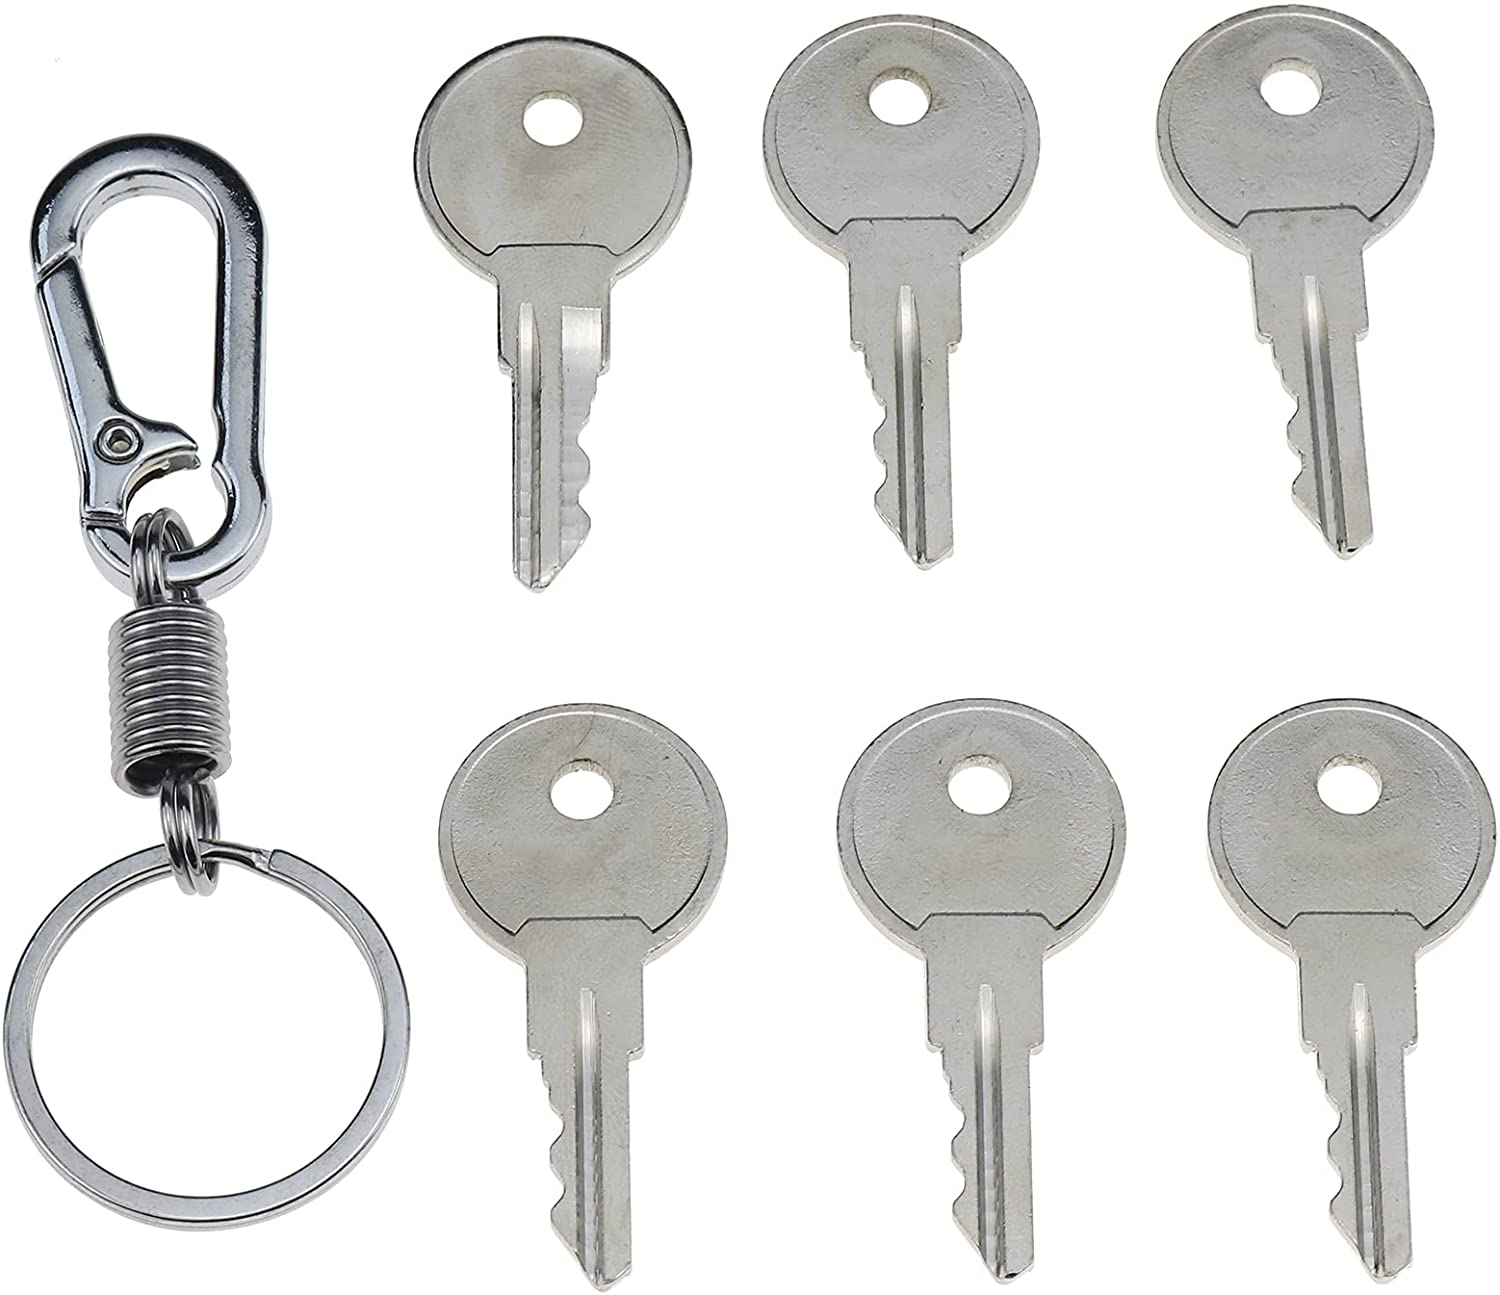 ZTUOAUMA 6X Universal Replacement Keys Stamped CH751 with Key Chain for Various Locks